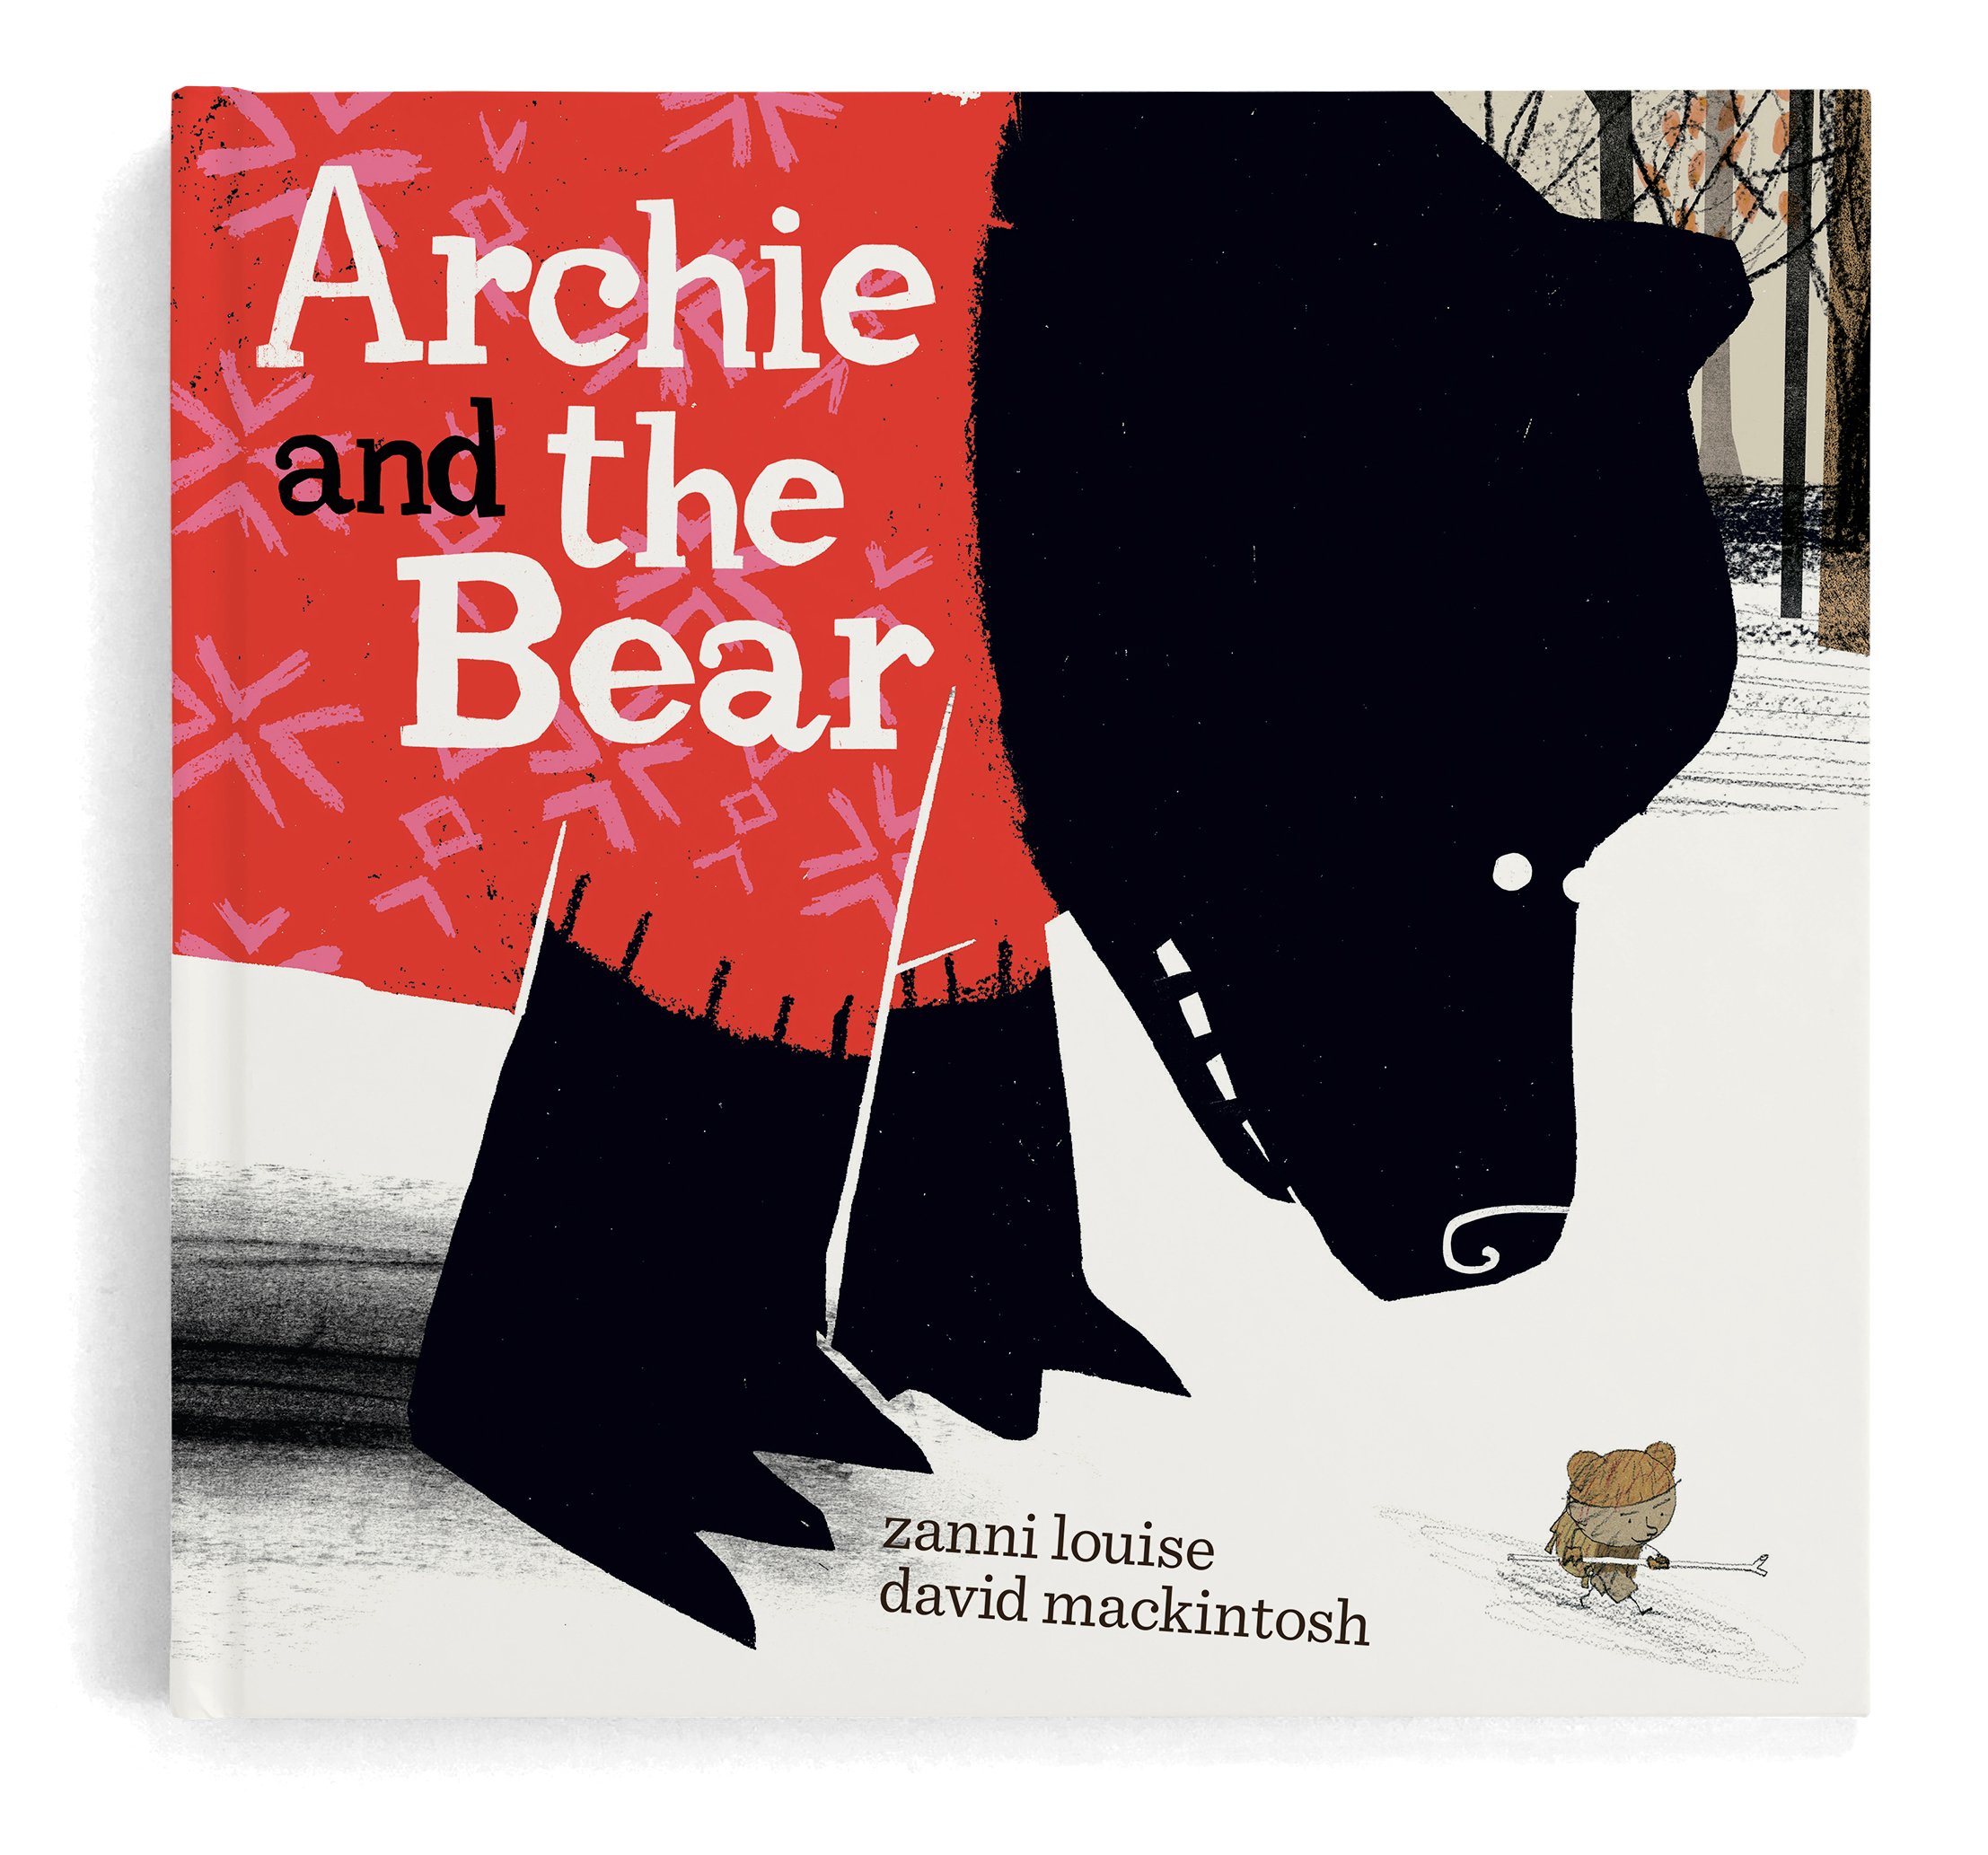 Archie and The Bear